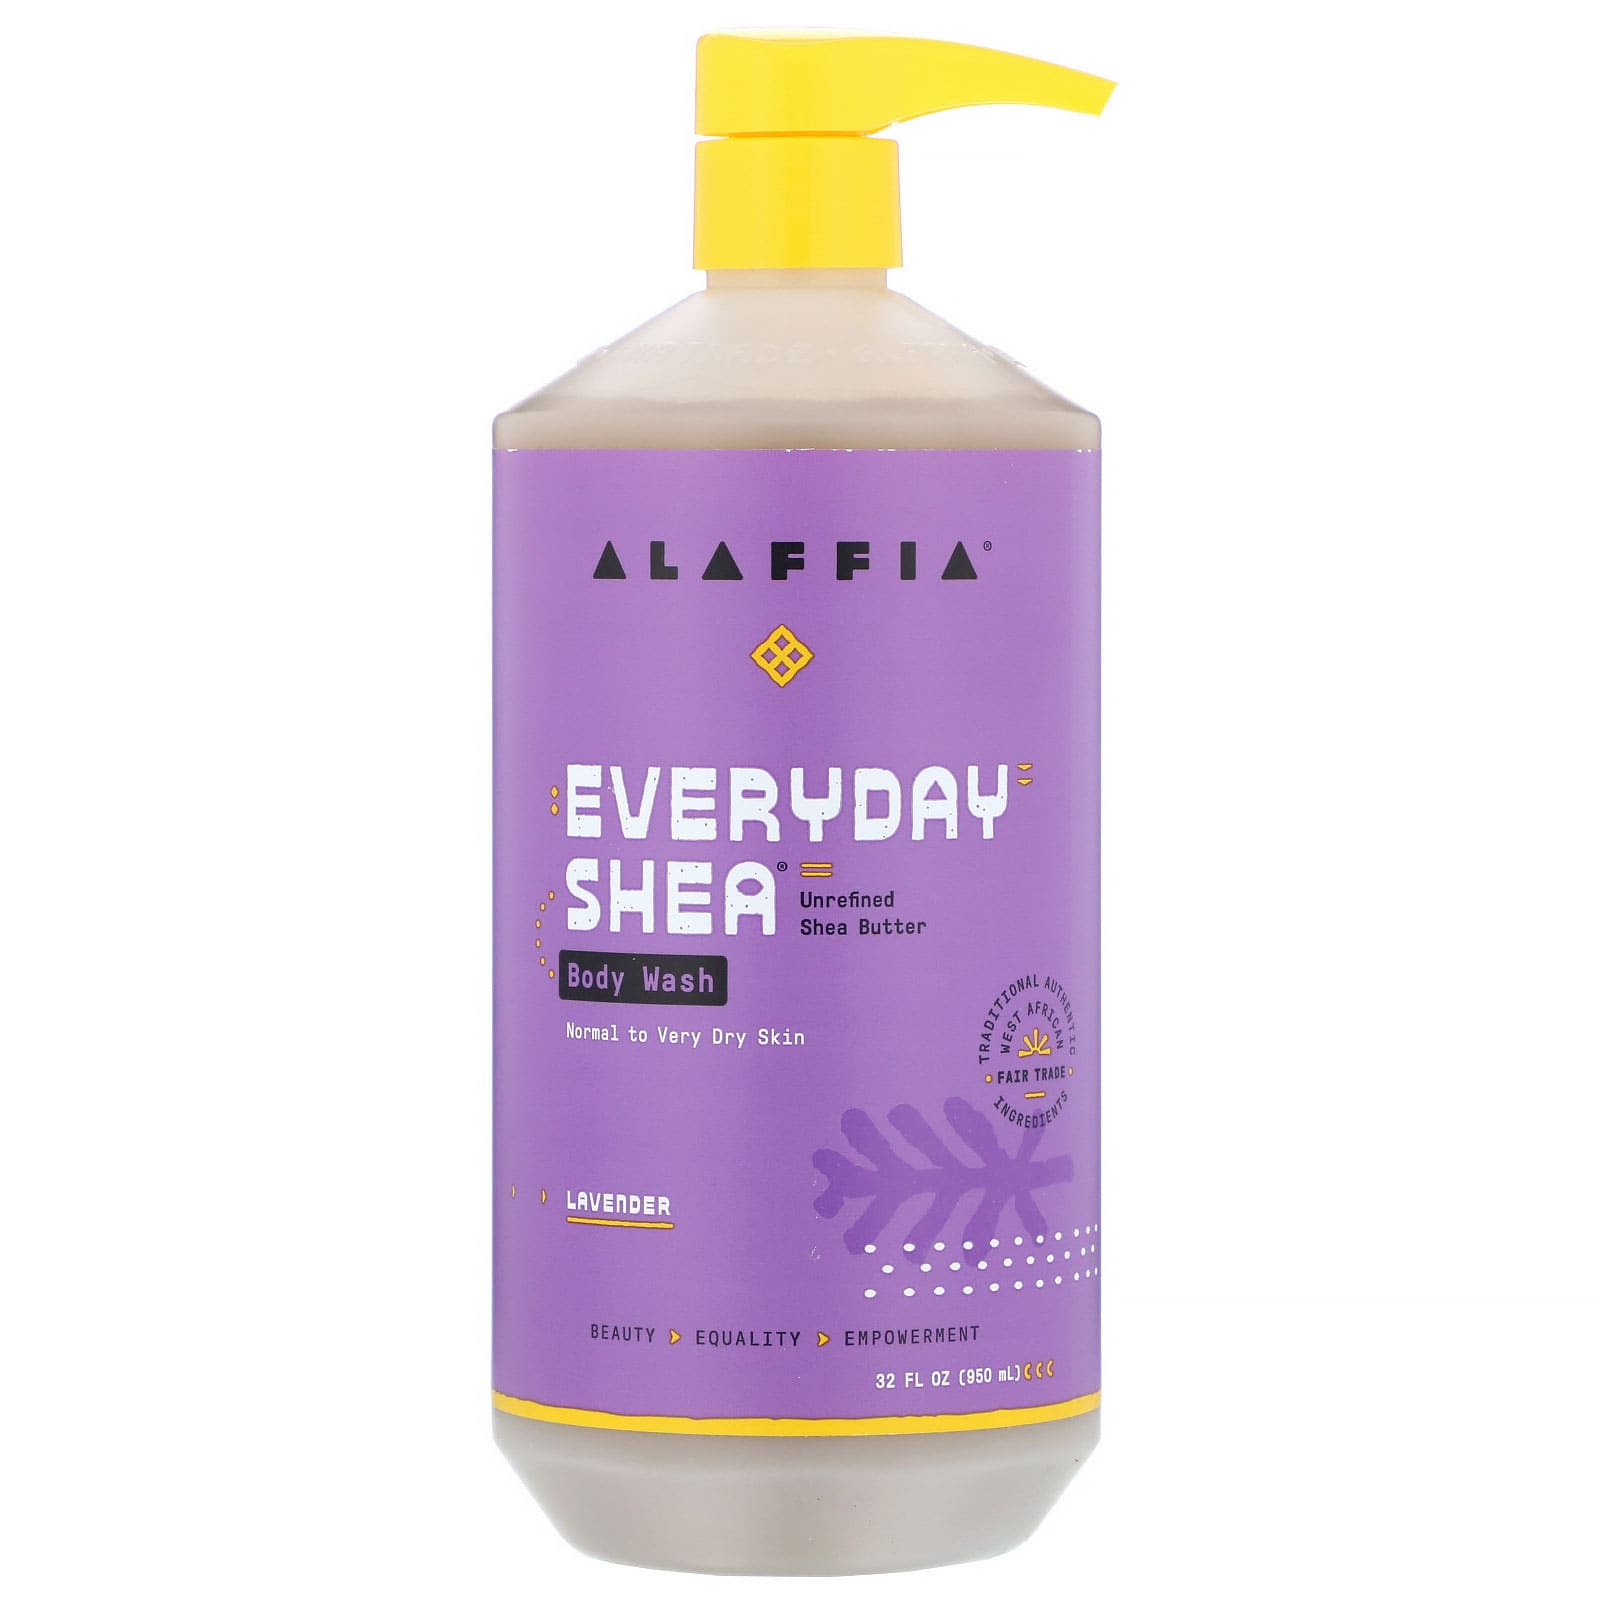 Alaffia, Everyday Shea, Body Wash, Normal to Very Dry Skin, Lavender (950 ml)